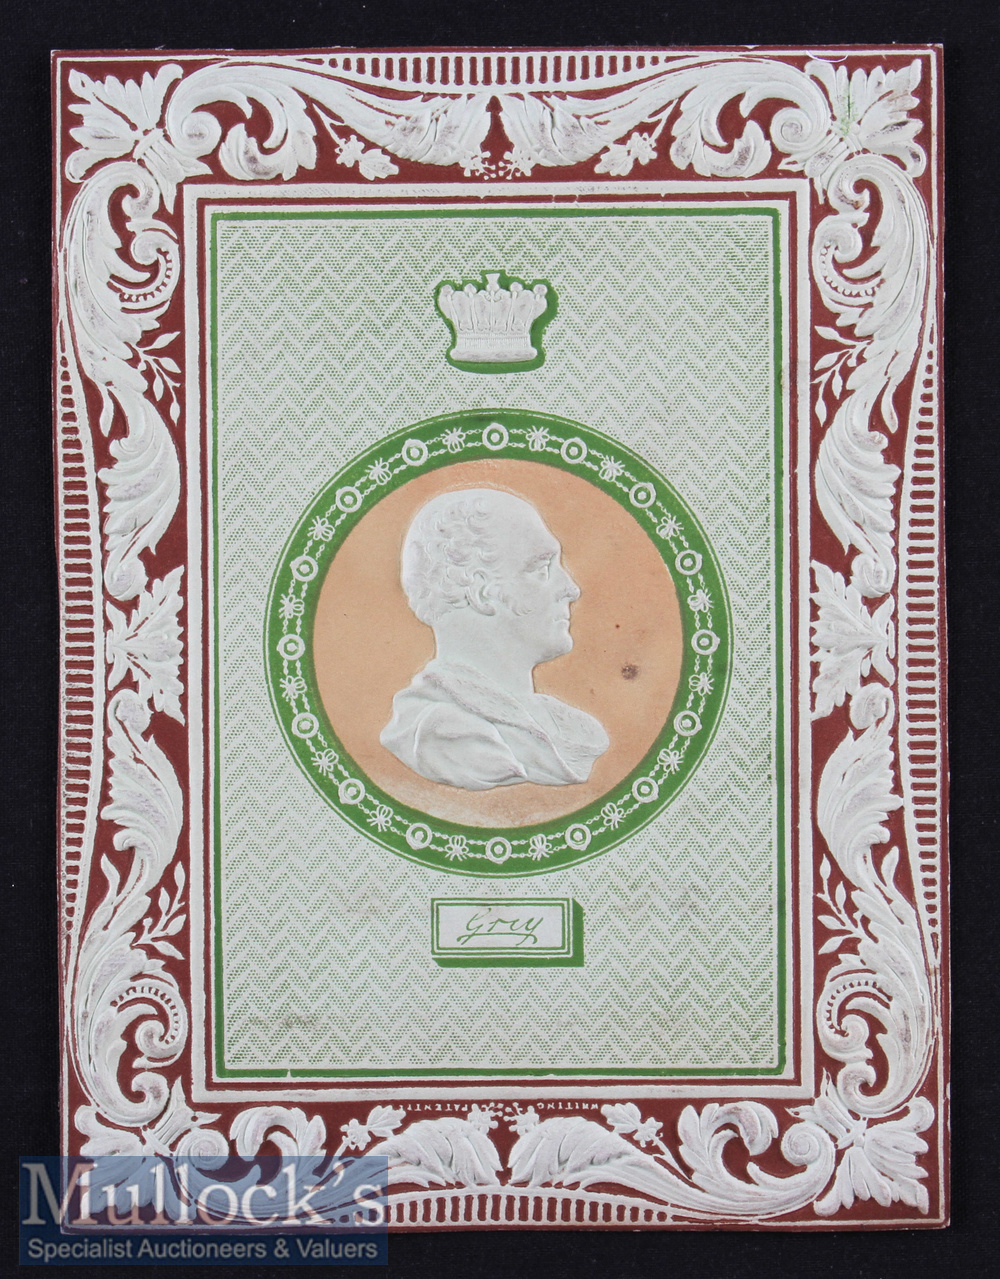 Lord Grey^ Prime Minister Paper Embossed Cameo by Charles Whiting an embossed cameo using the